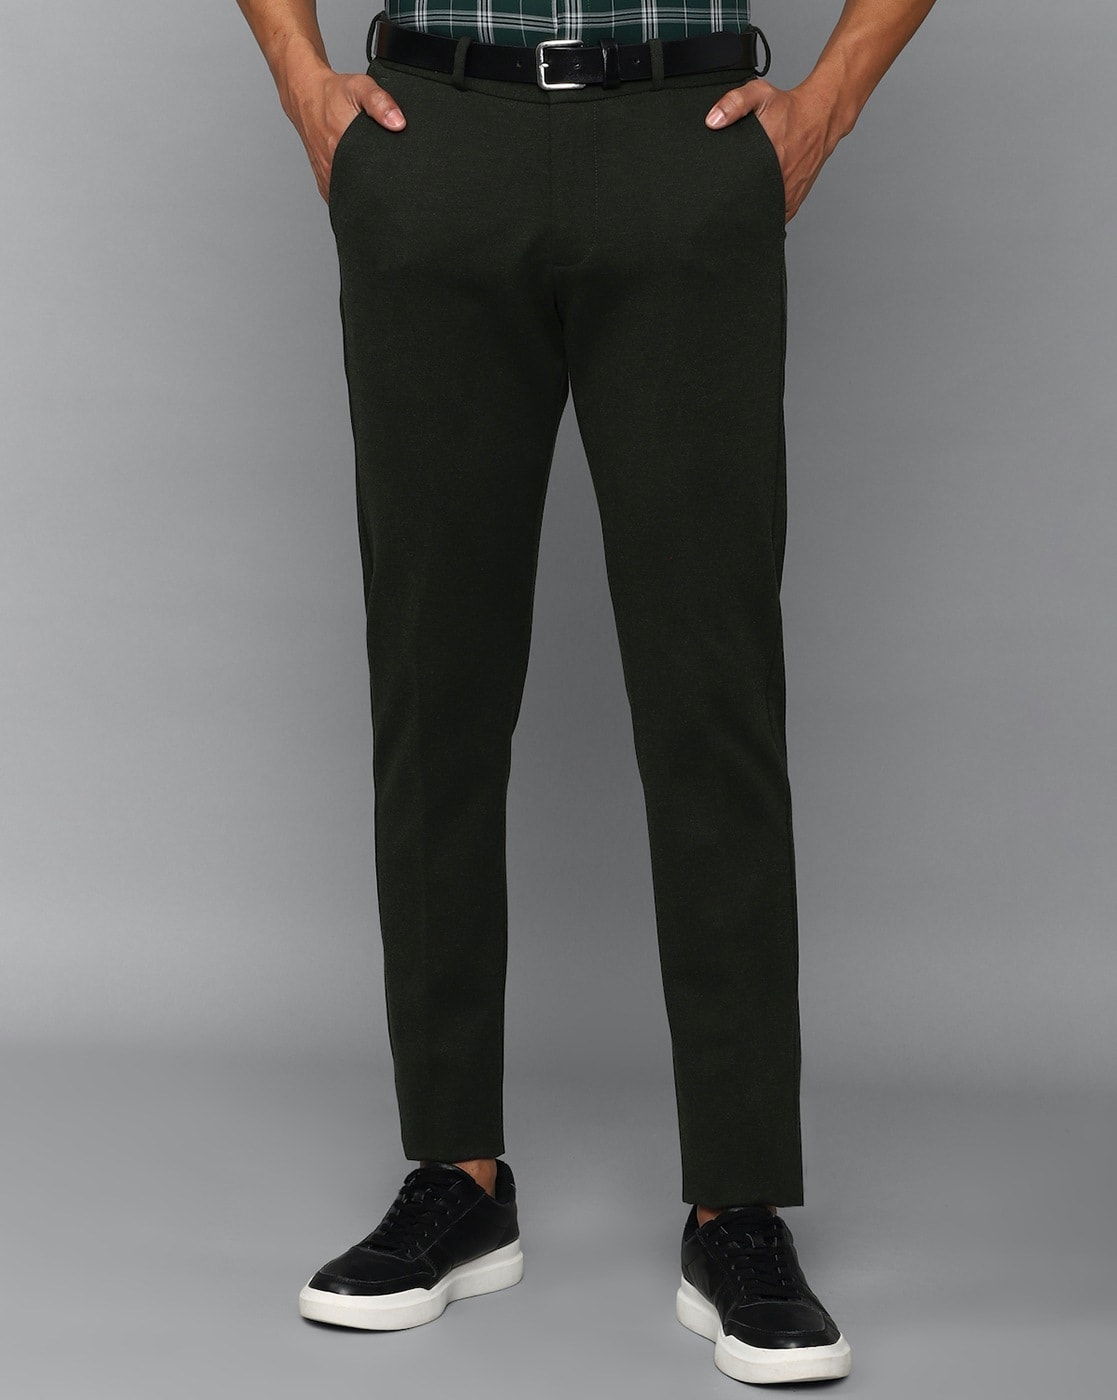 Mens Formal Pant 2021 Dress Ankle Pants Men High Waist Straight Social  Trousers From Dongguan_ss, $37.38 | DHgate.Com